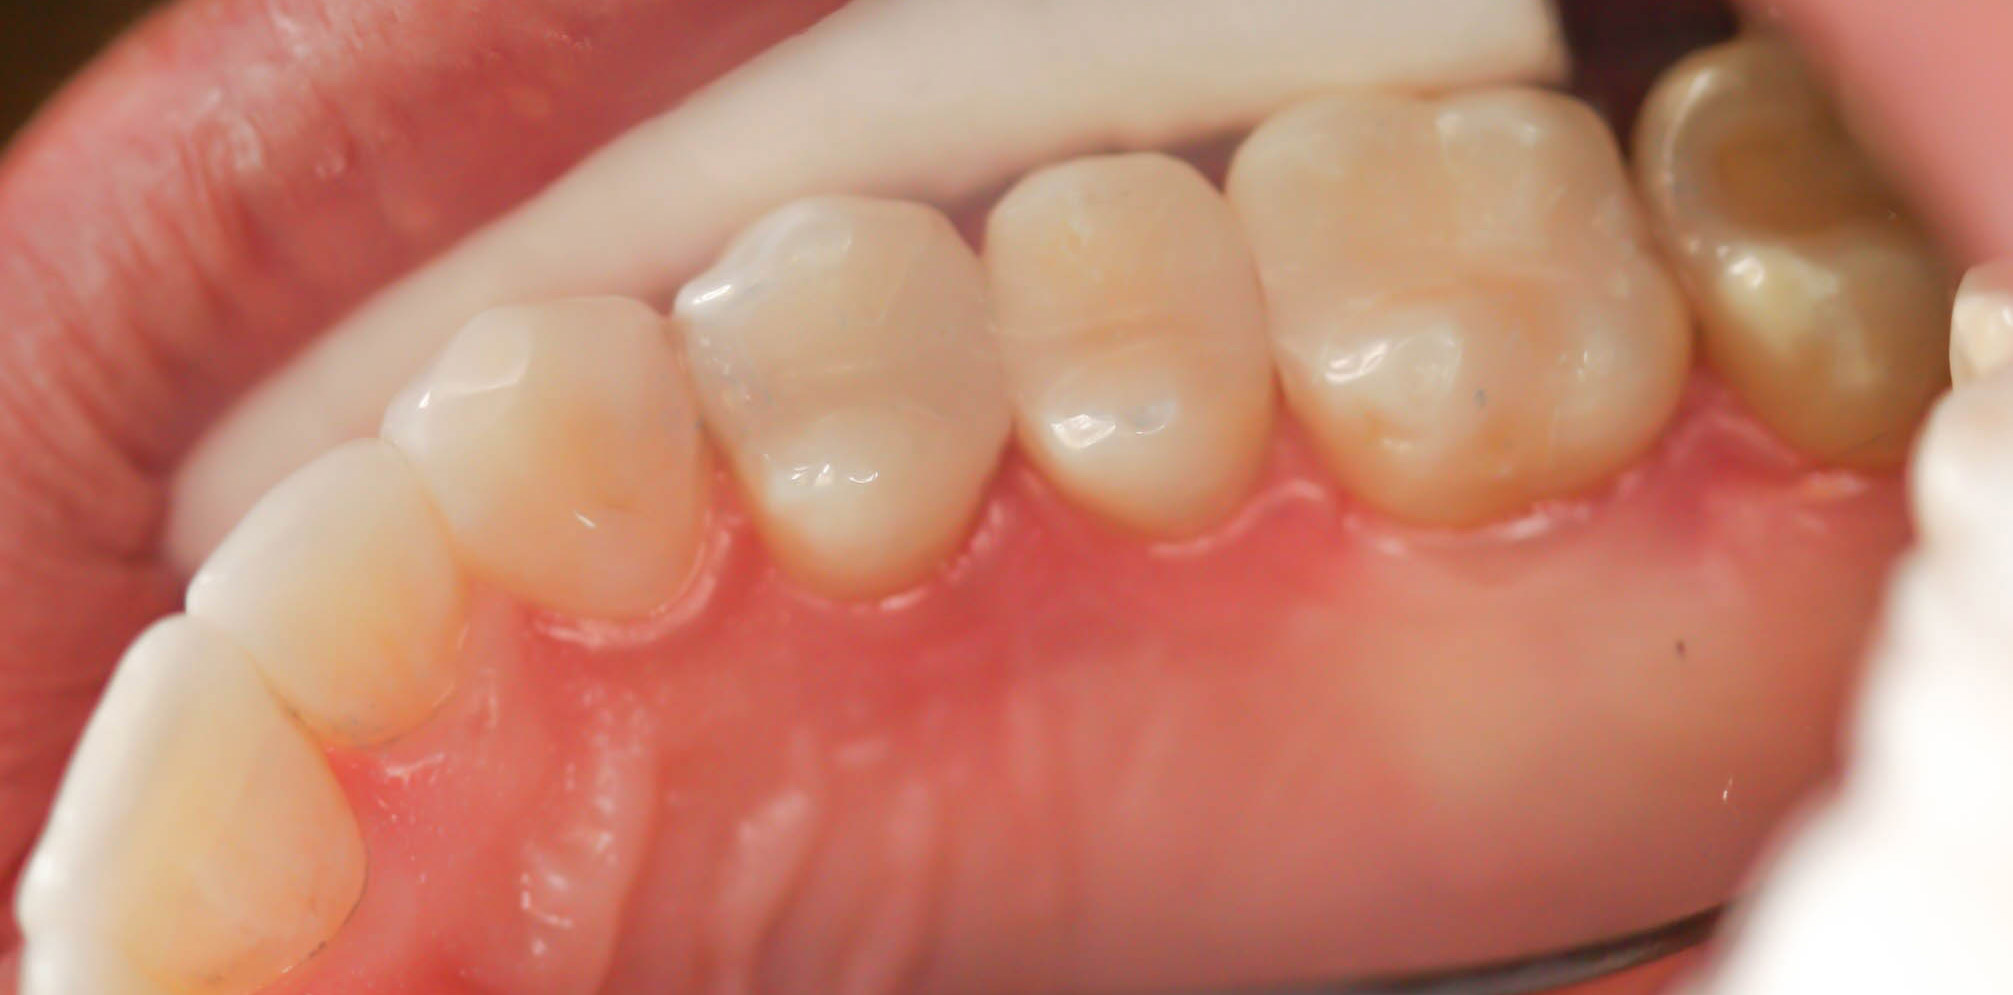 Safe amalgam or mercury filling removal and replacement with biocompatible tooth colored fillings -- the After picture